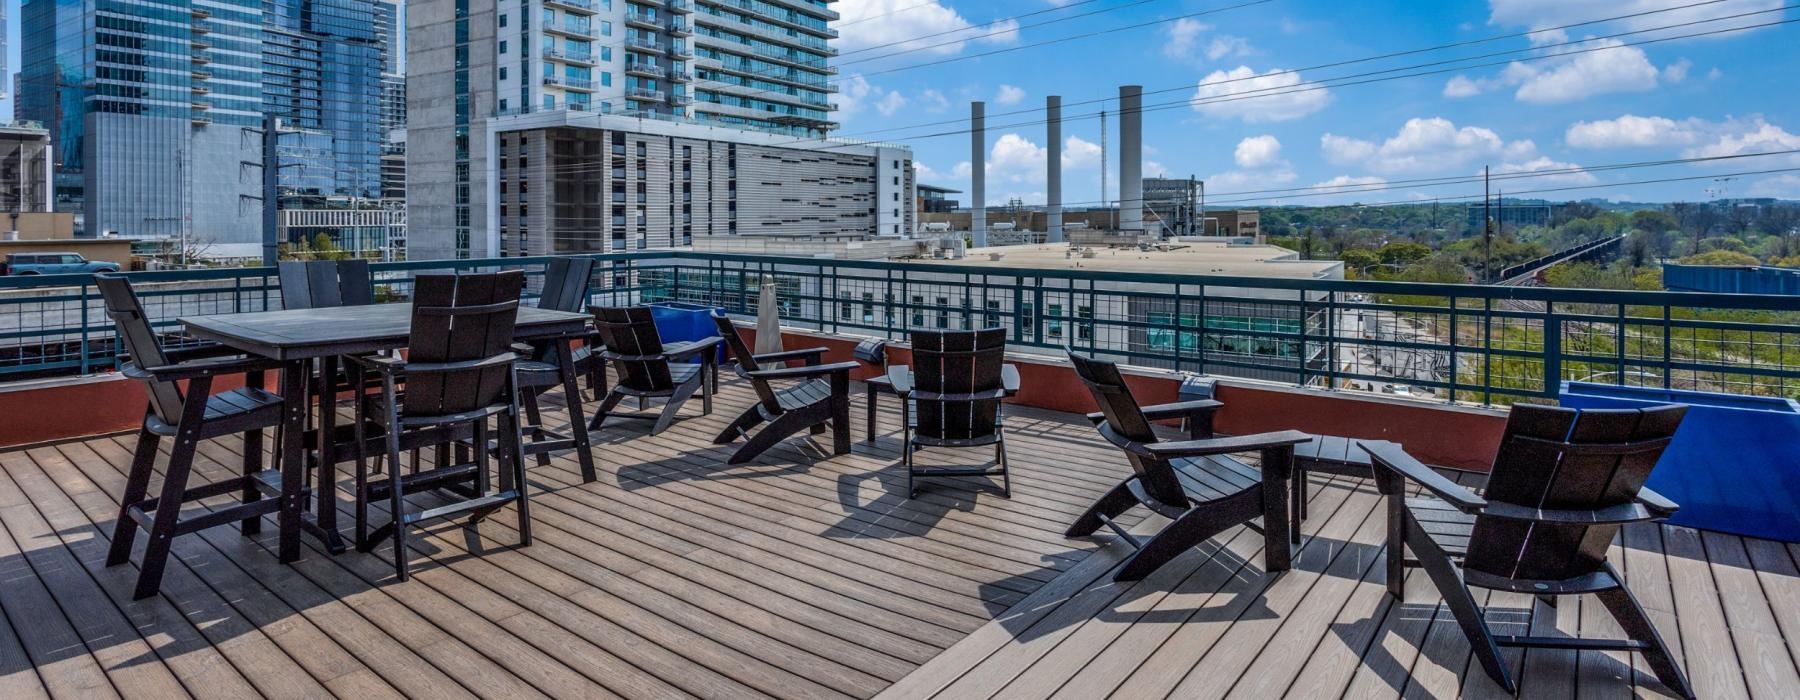 a deck with tables and chairs with tall buildings behind it